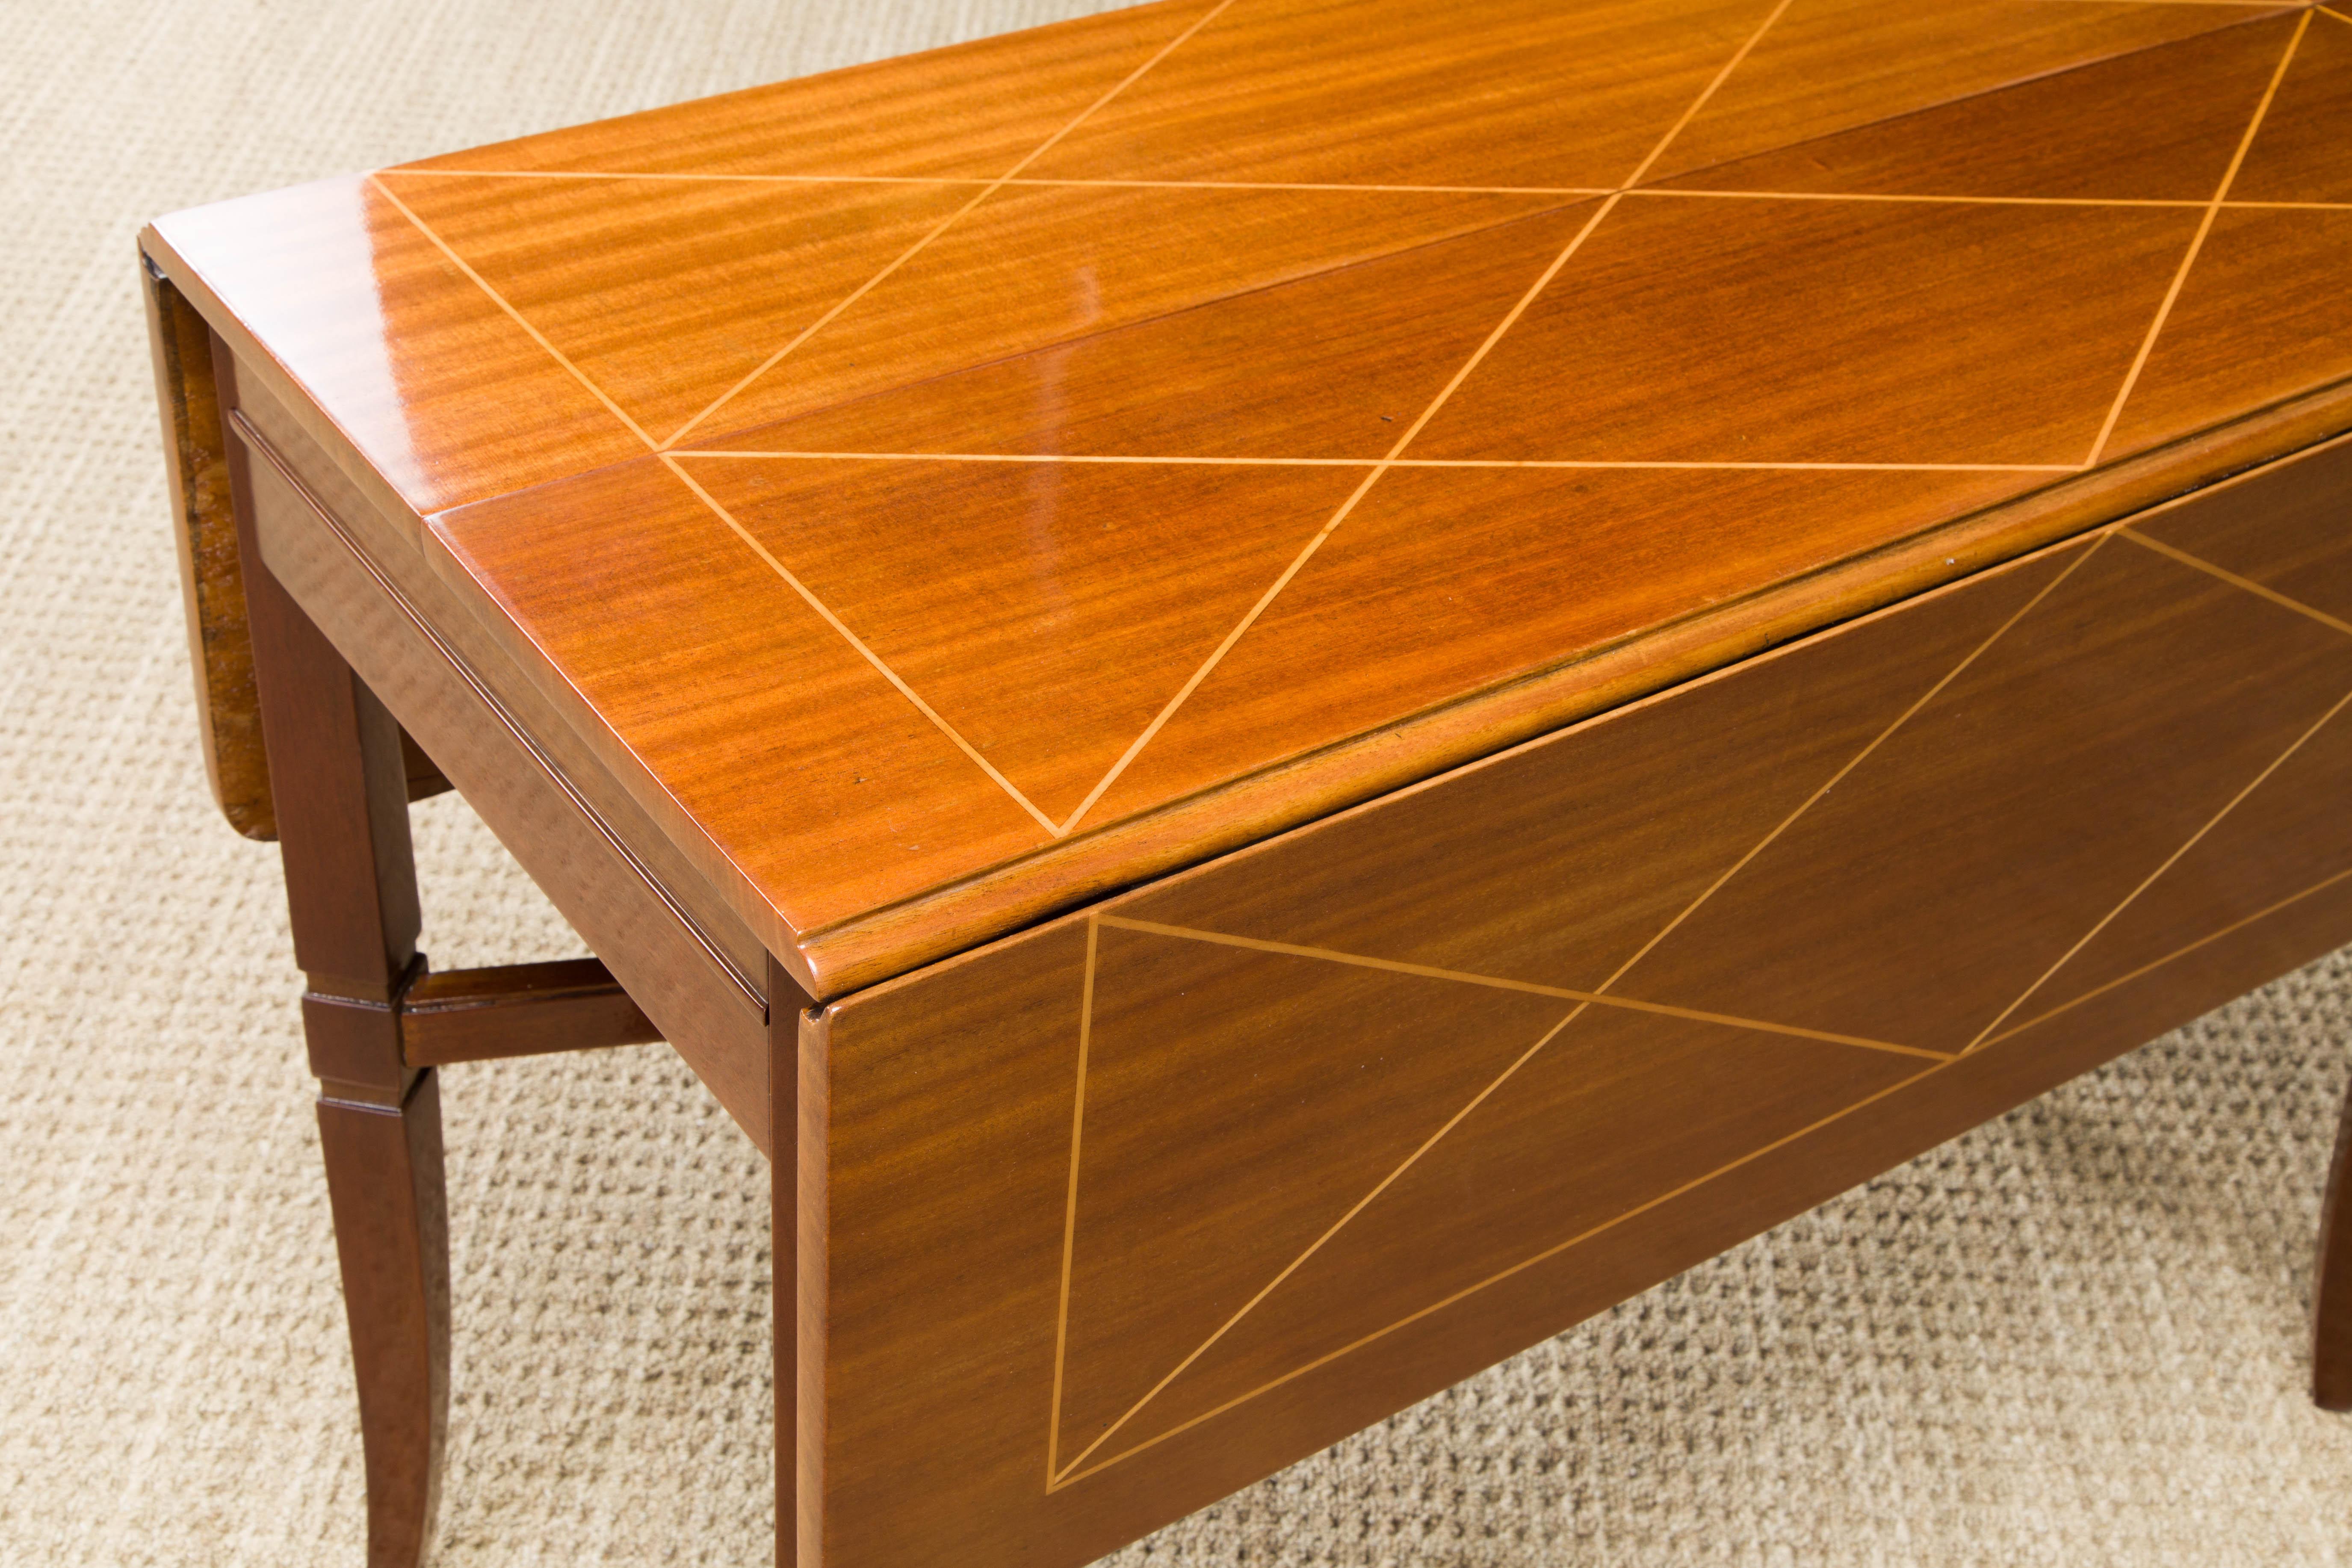 Mid-20th Century Tommi Parzinger Mahogany Convertible Desk, Dining & Console Table, 1951, Signed 